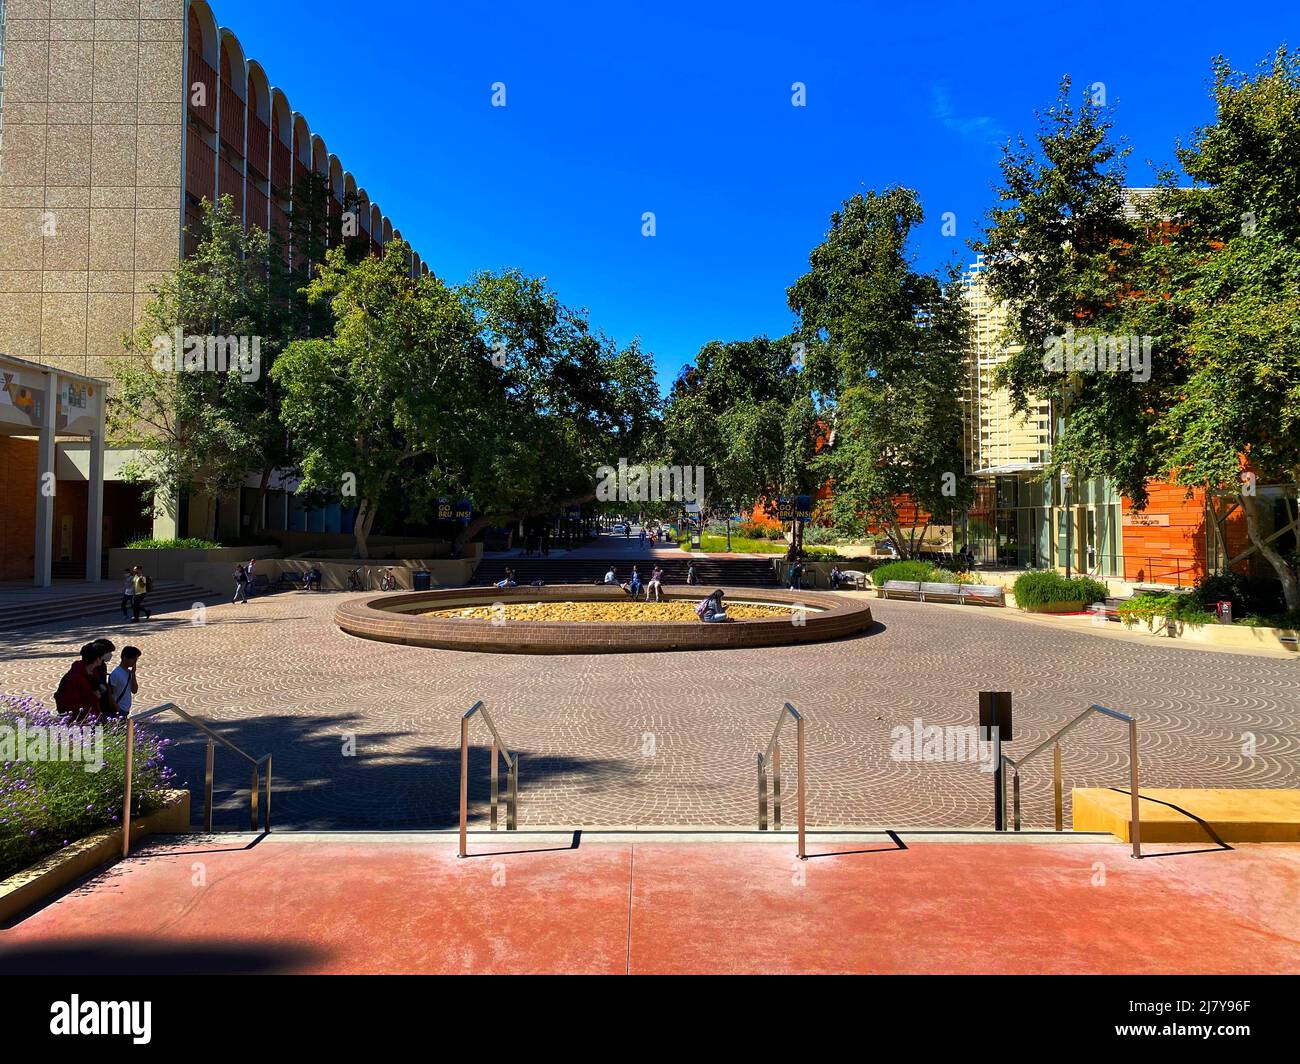 The Inverted Fountain at UCLA Stock Photo